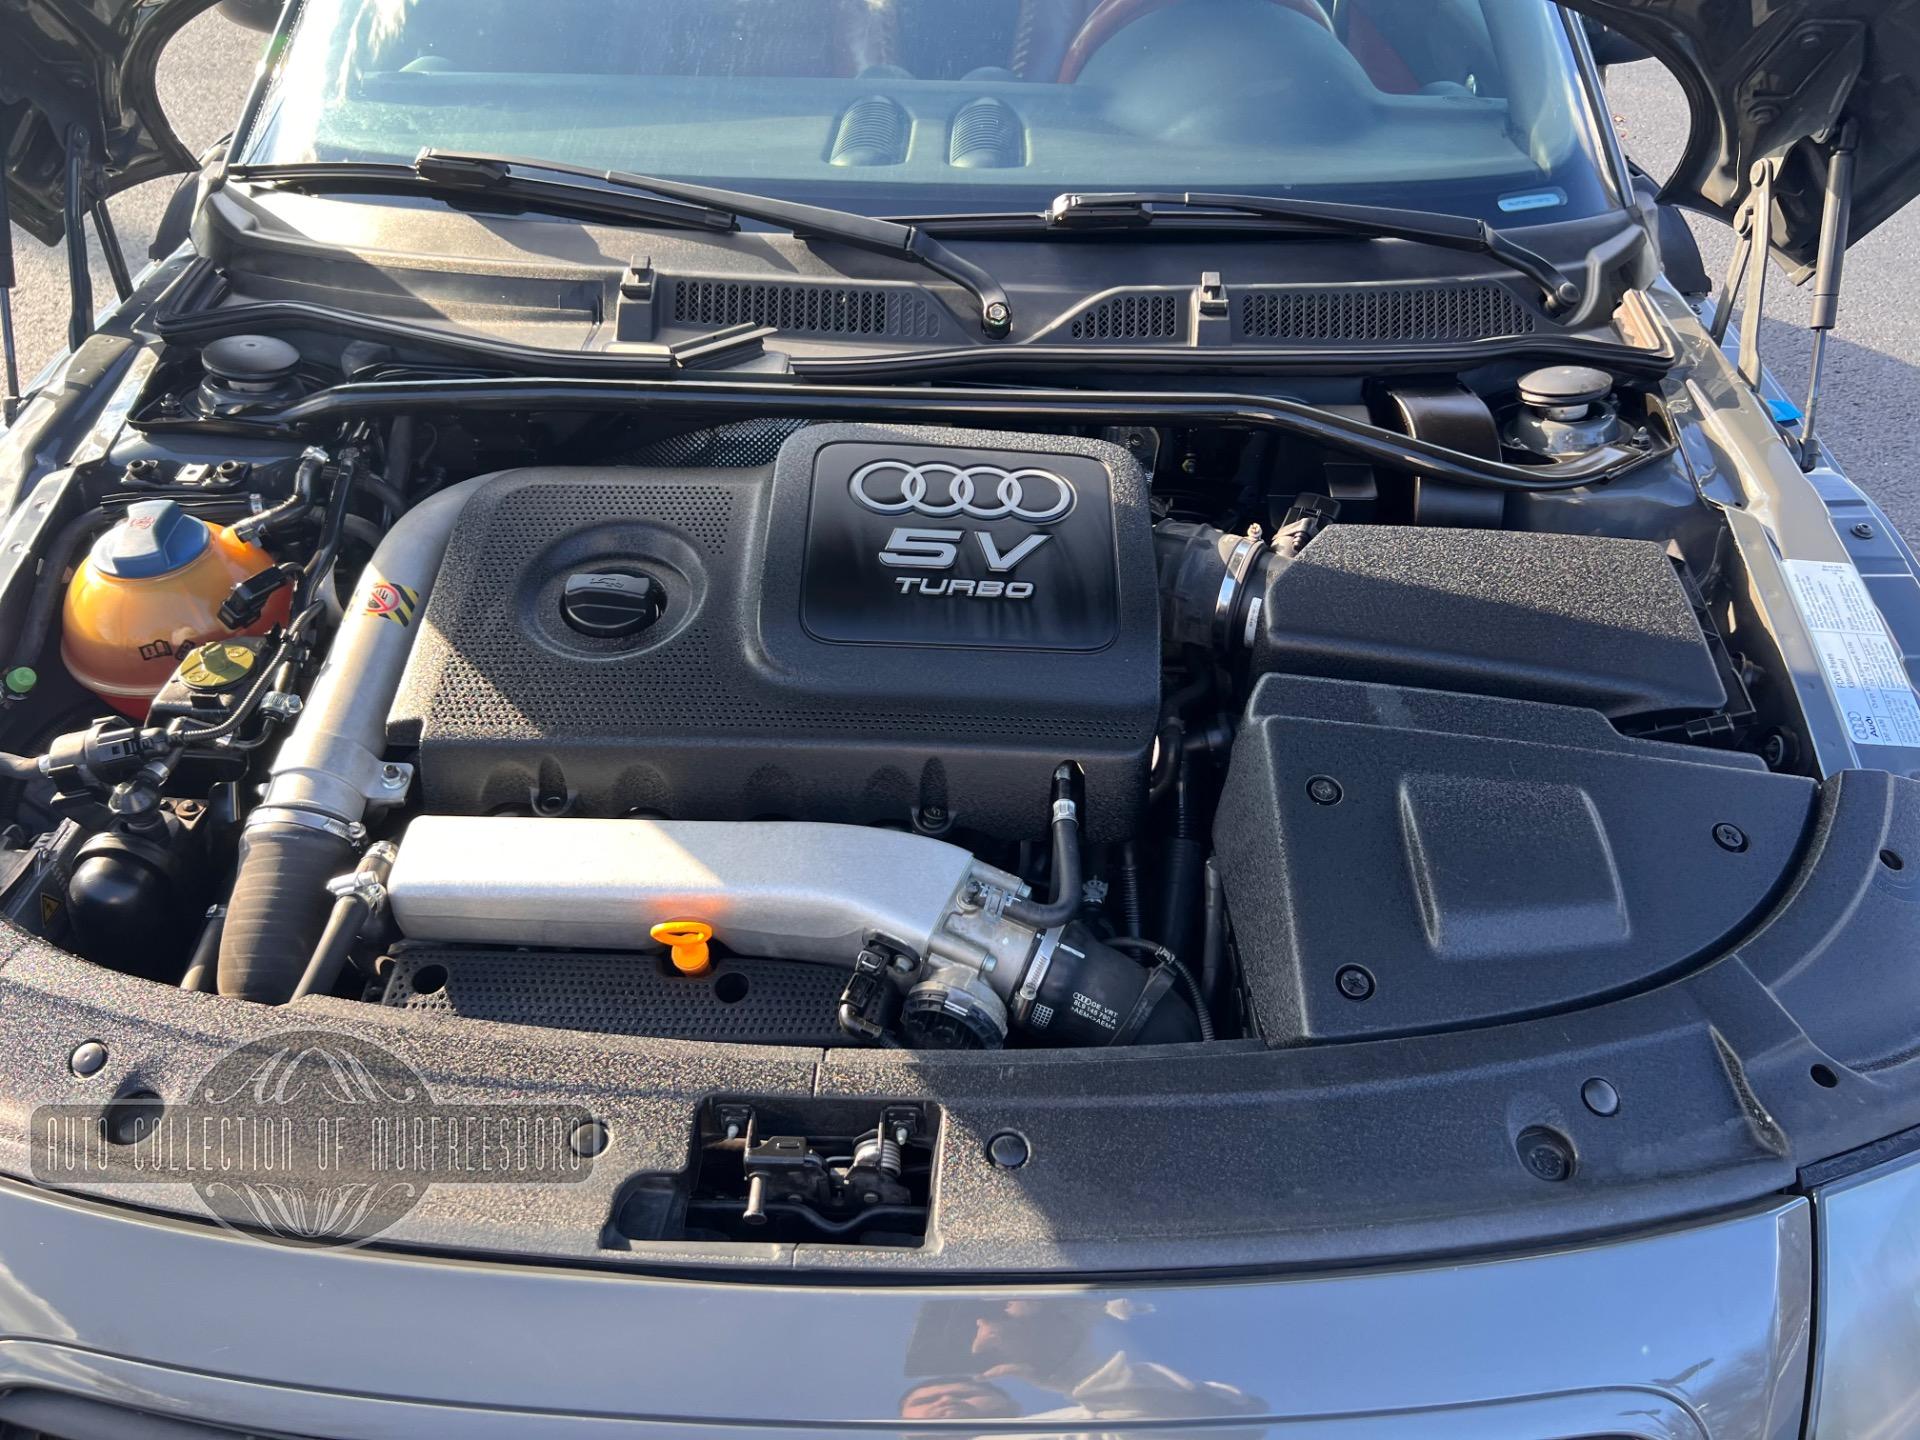 Used 2001 Audi TT ROADSTER CONVERTIBLE 225HP QUATTRO AWD For Sale (Sold)